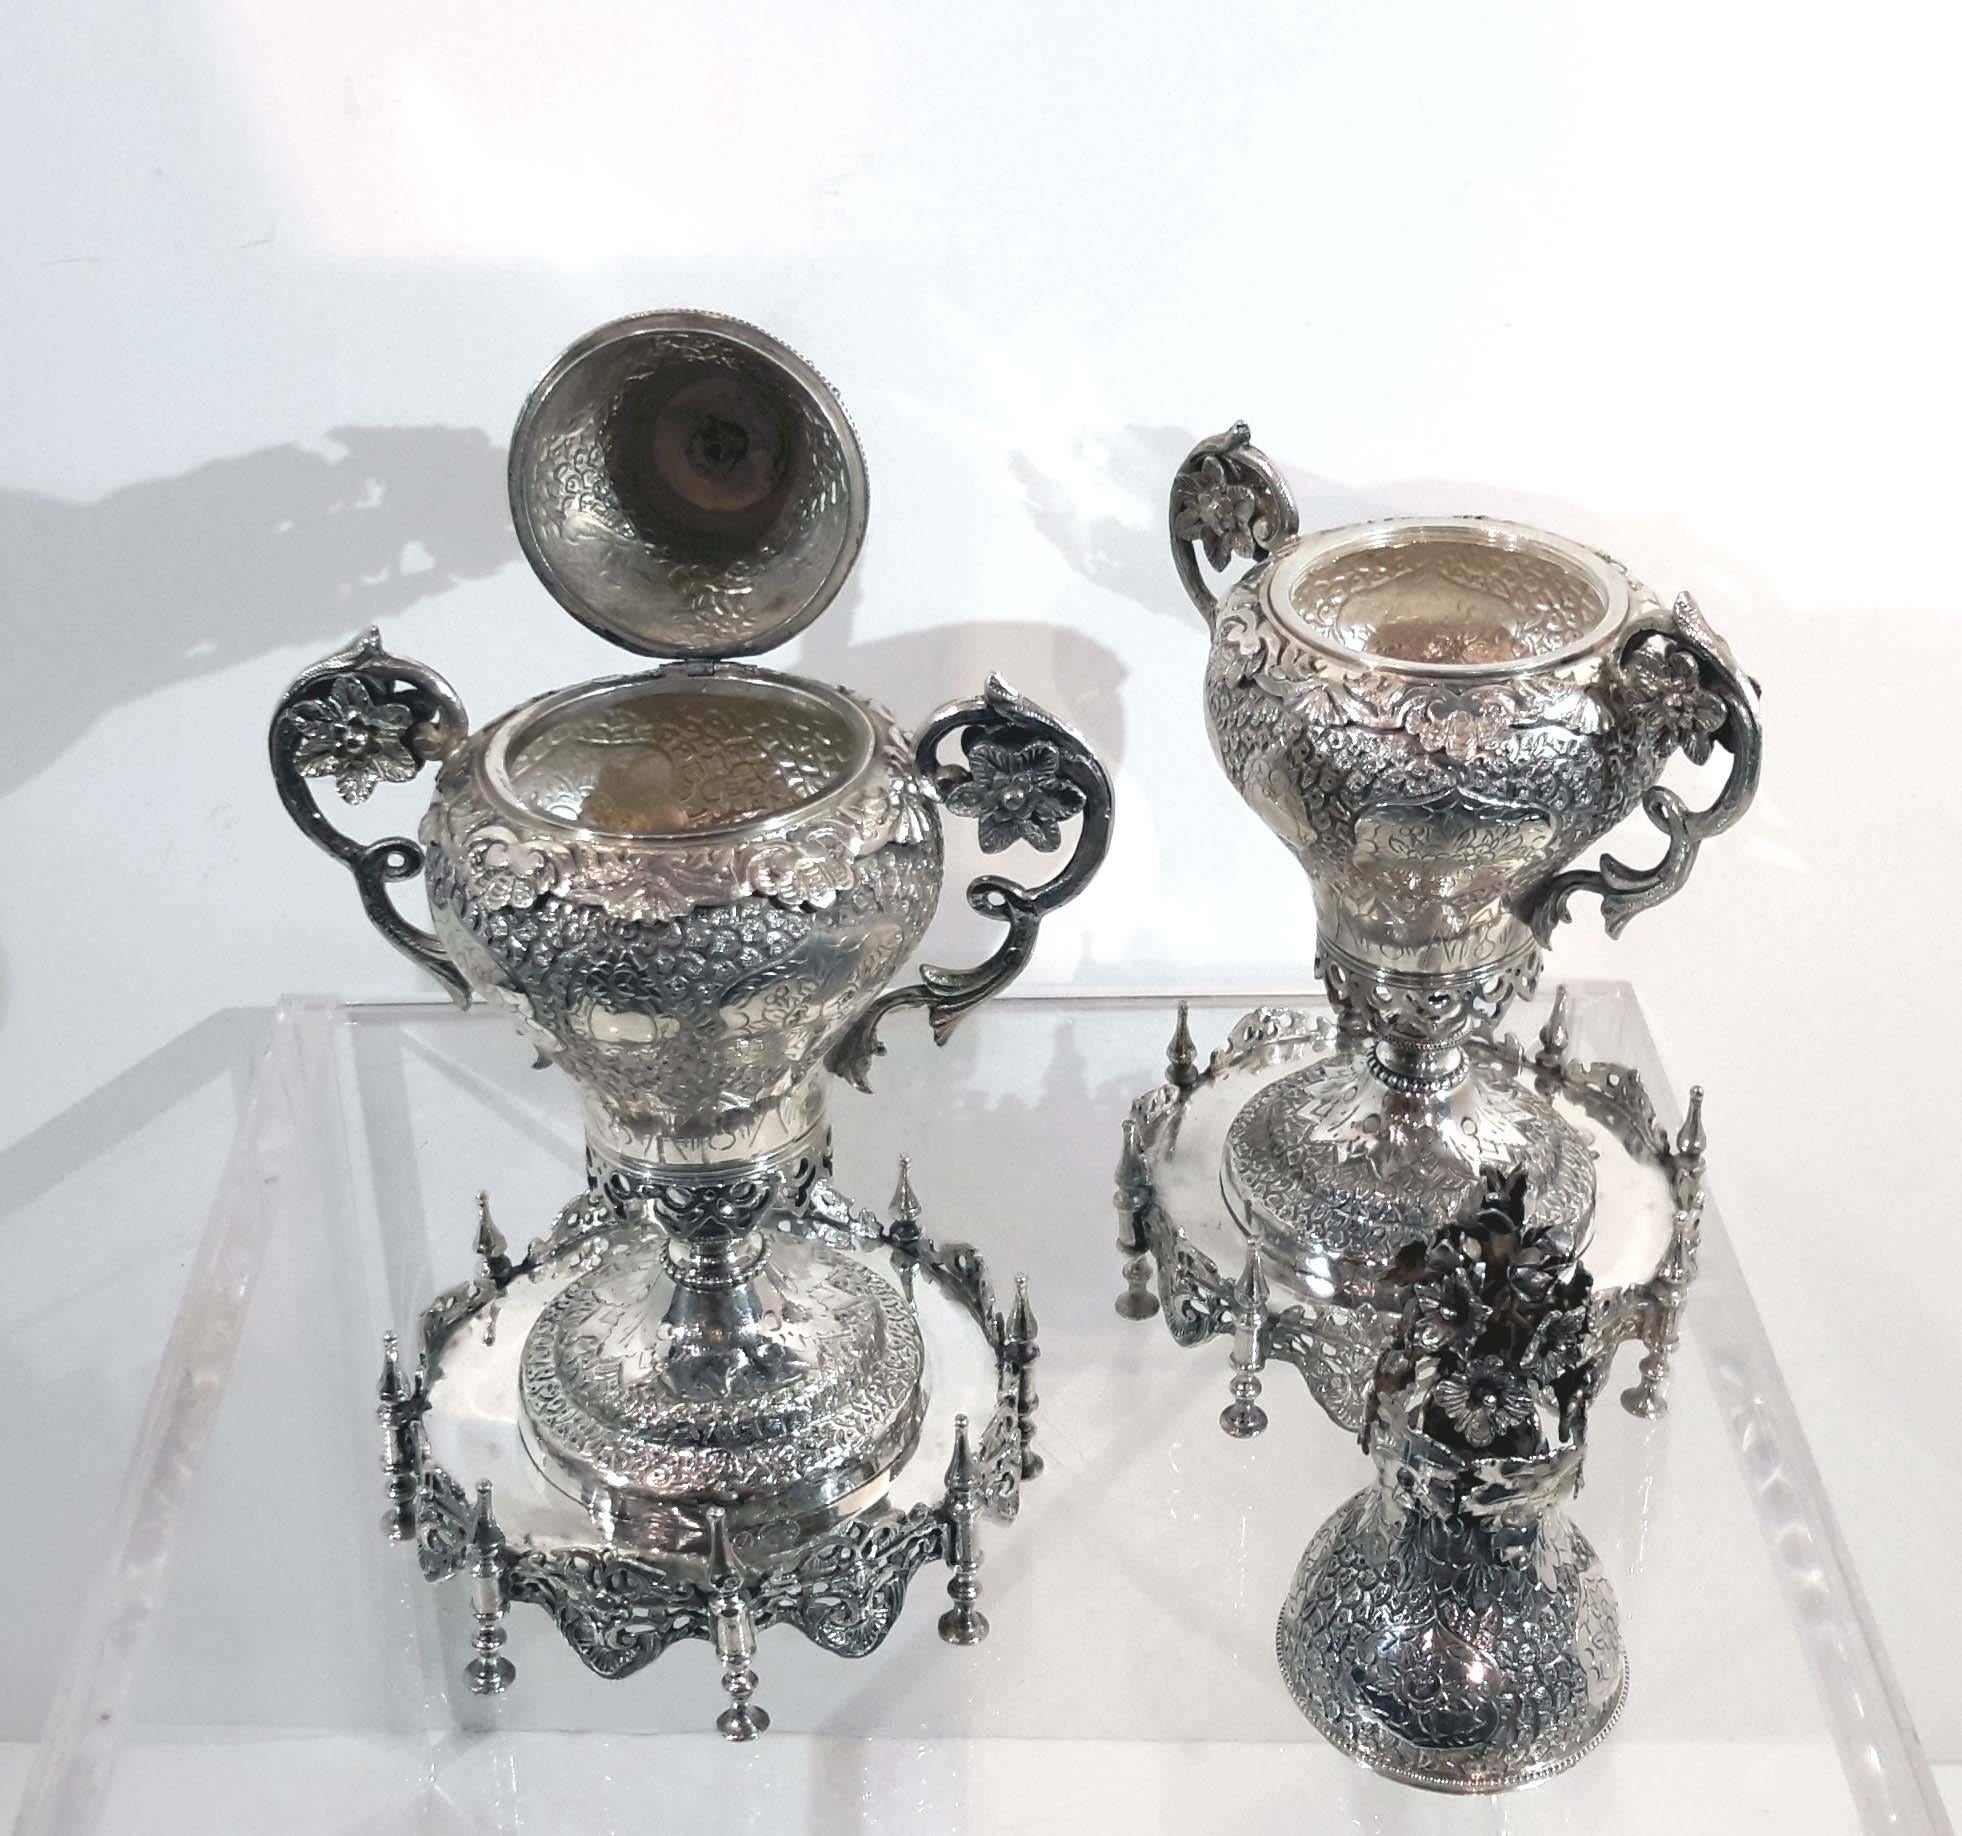 Islamic Pair of Ottoman Silver Spice & Rosewater Containers, Turkey, 19th Century